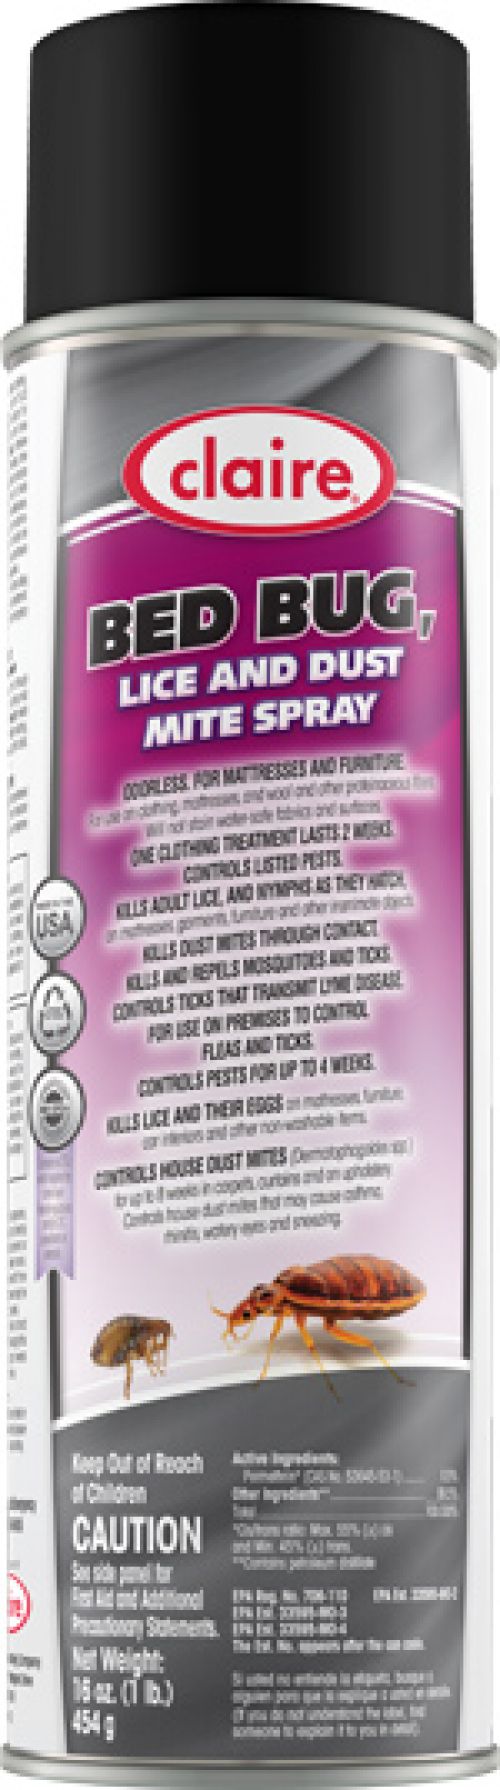 Claire Bed Bug Dust Might& Lice Killer Pack 12/16oz